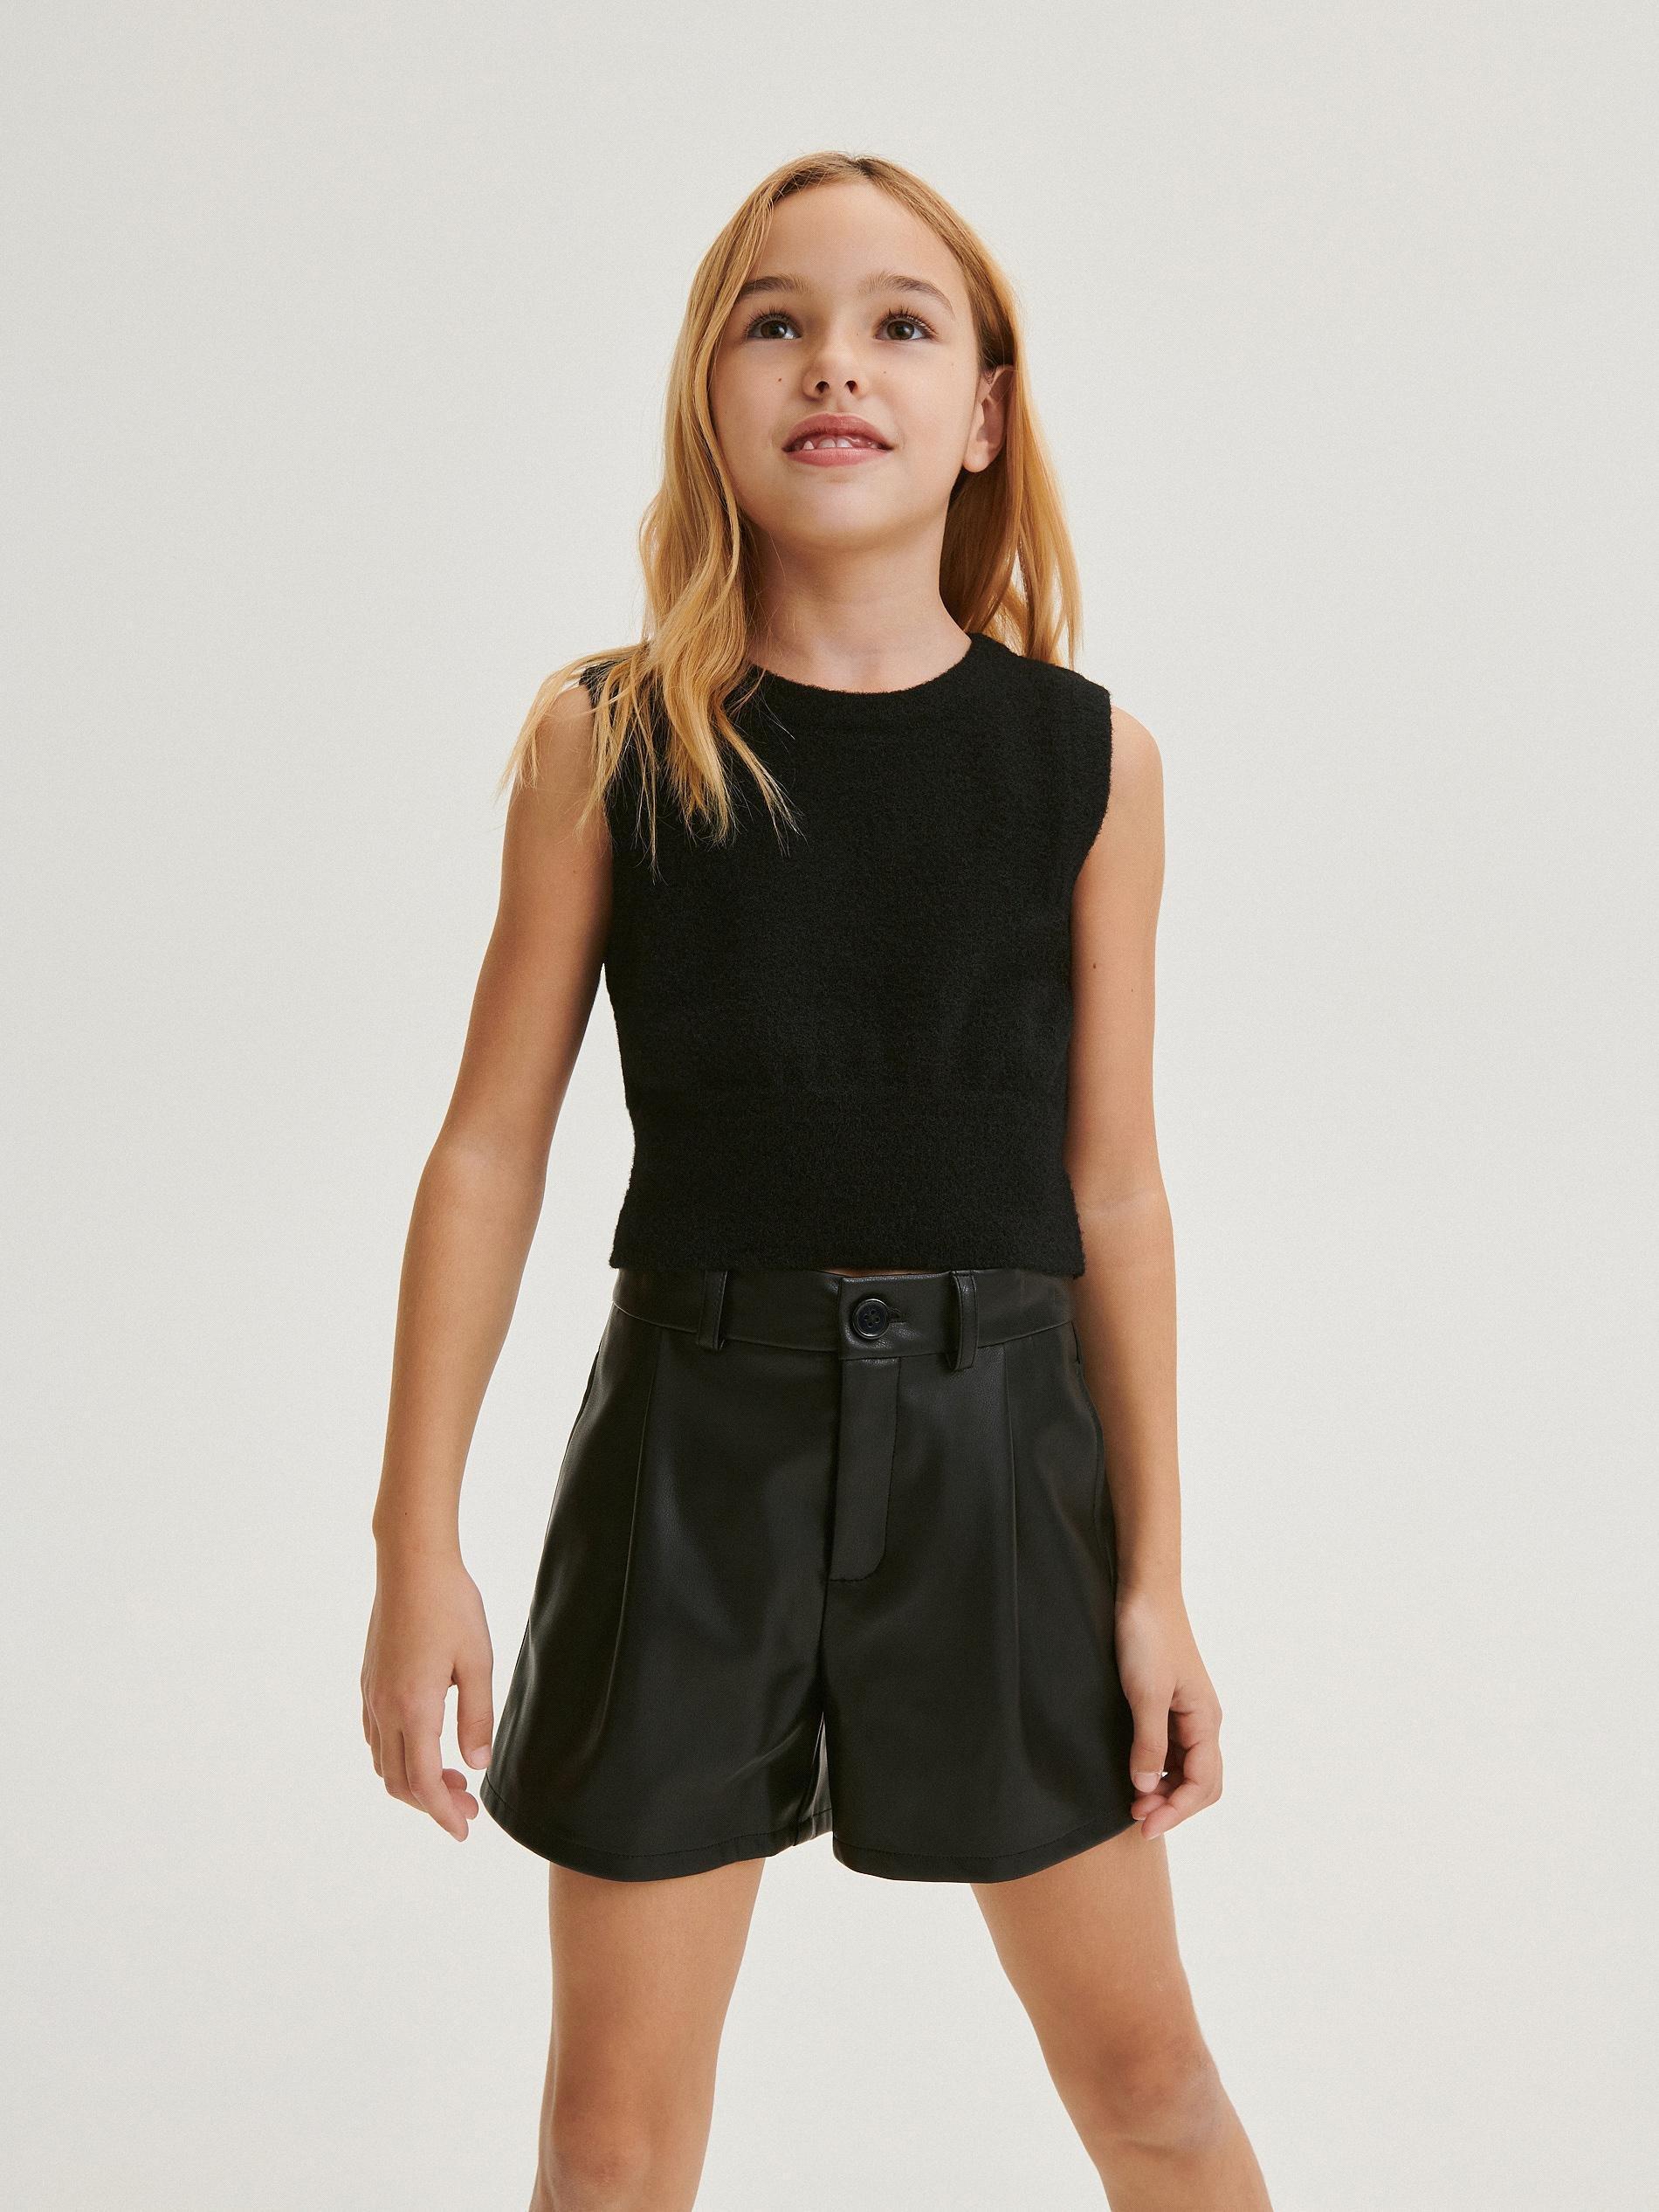 Reserved - Black Knitted Top, Kids Girls